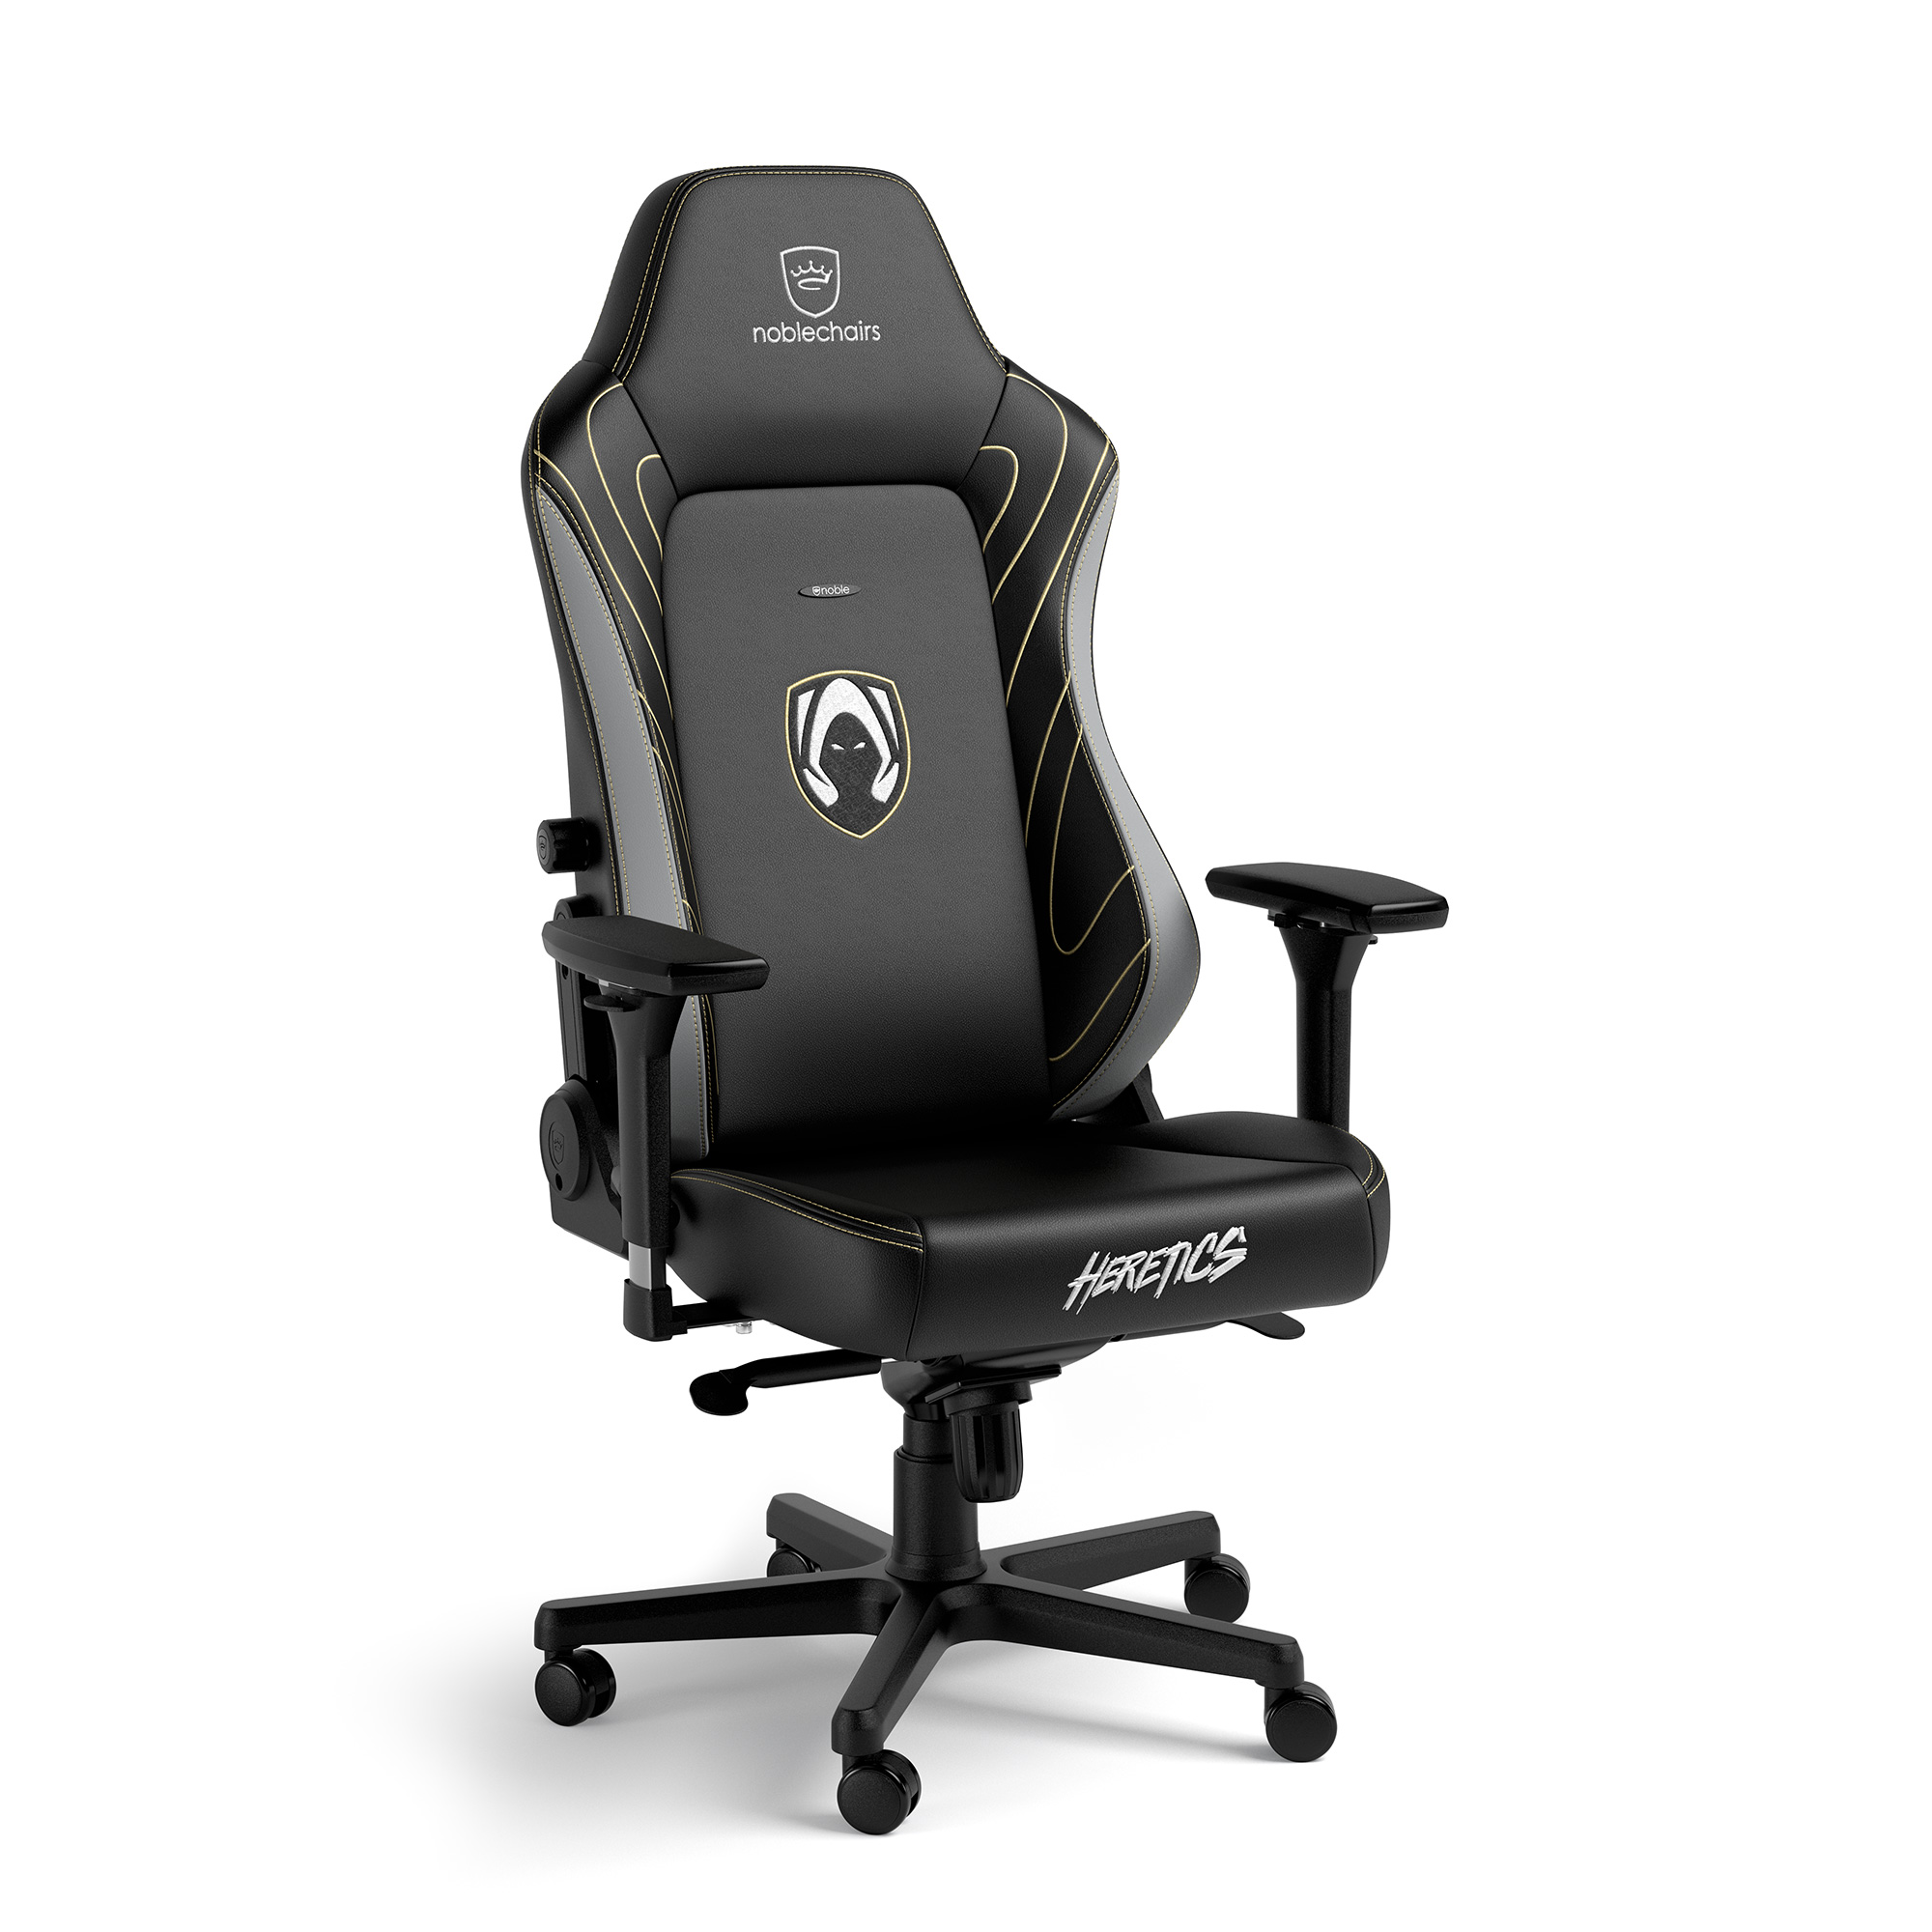 noblechairs - noblechairs HERO Gaming Chair - Team Heretics Edition